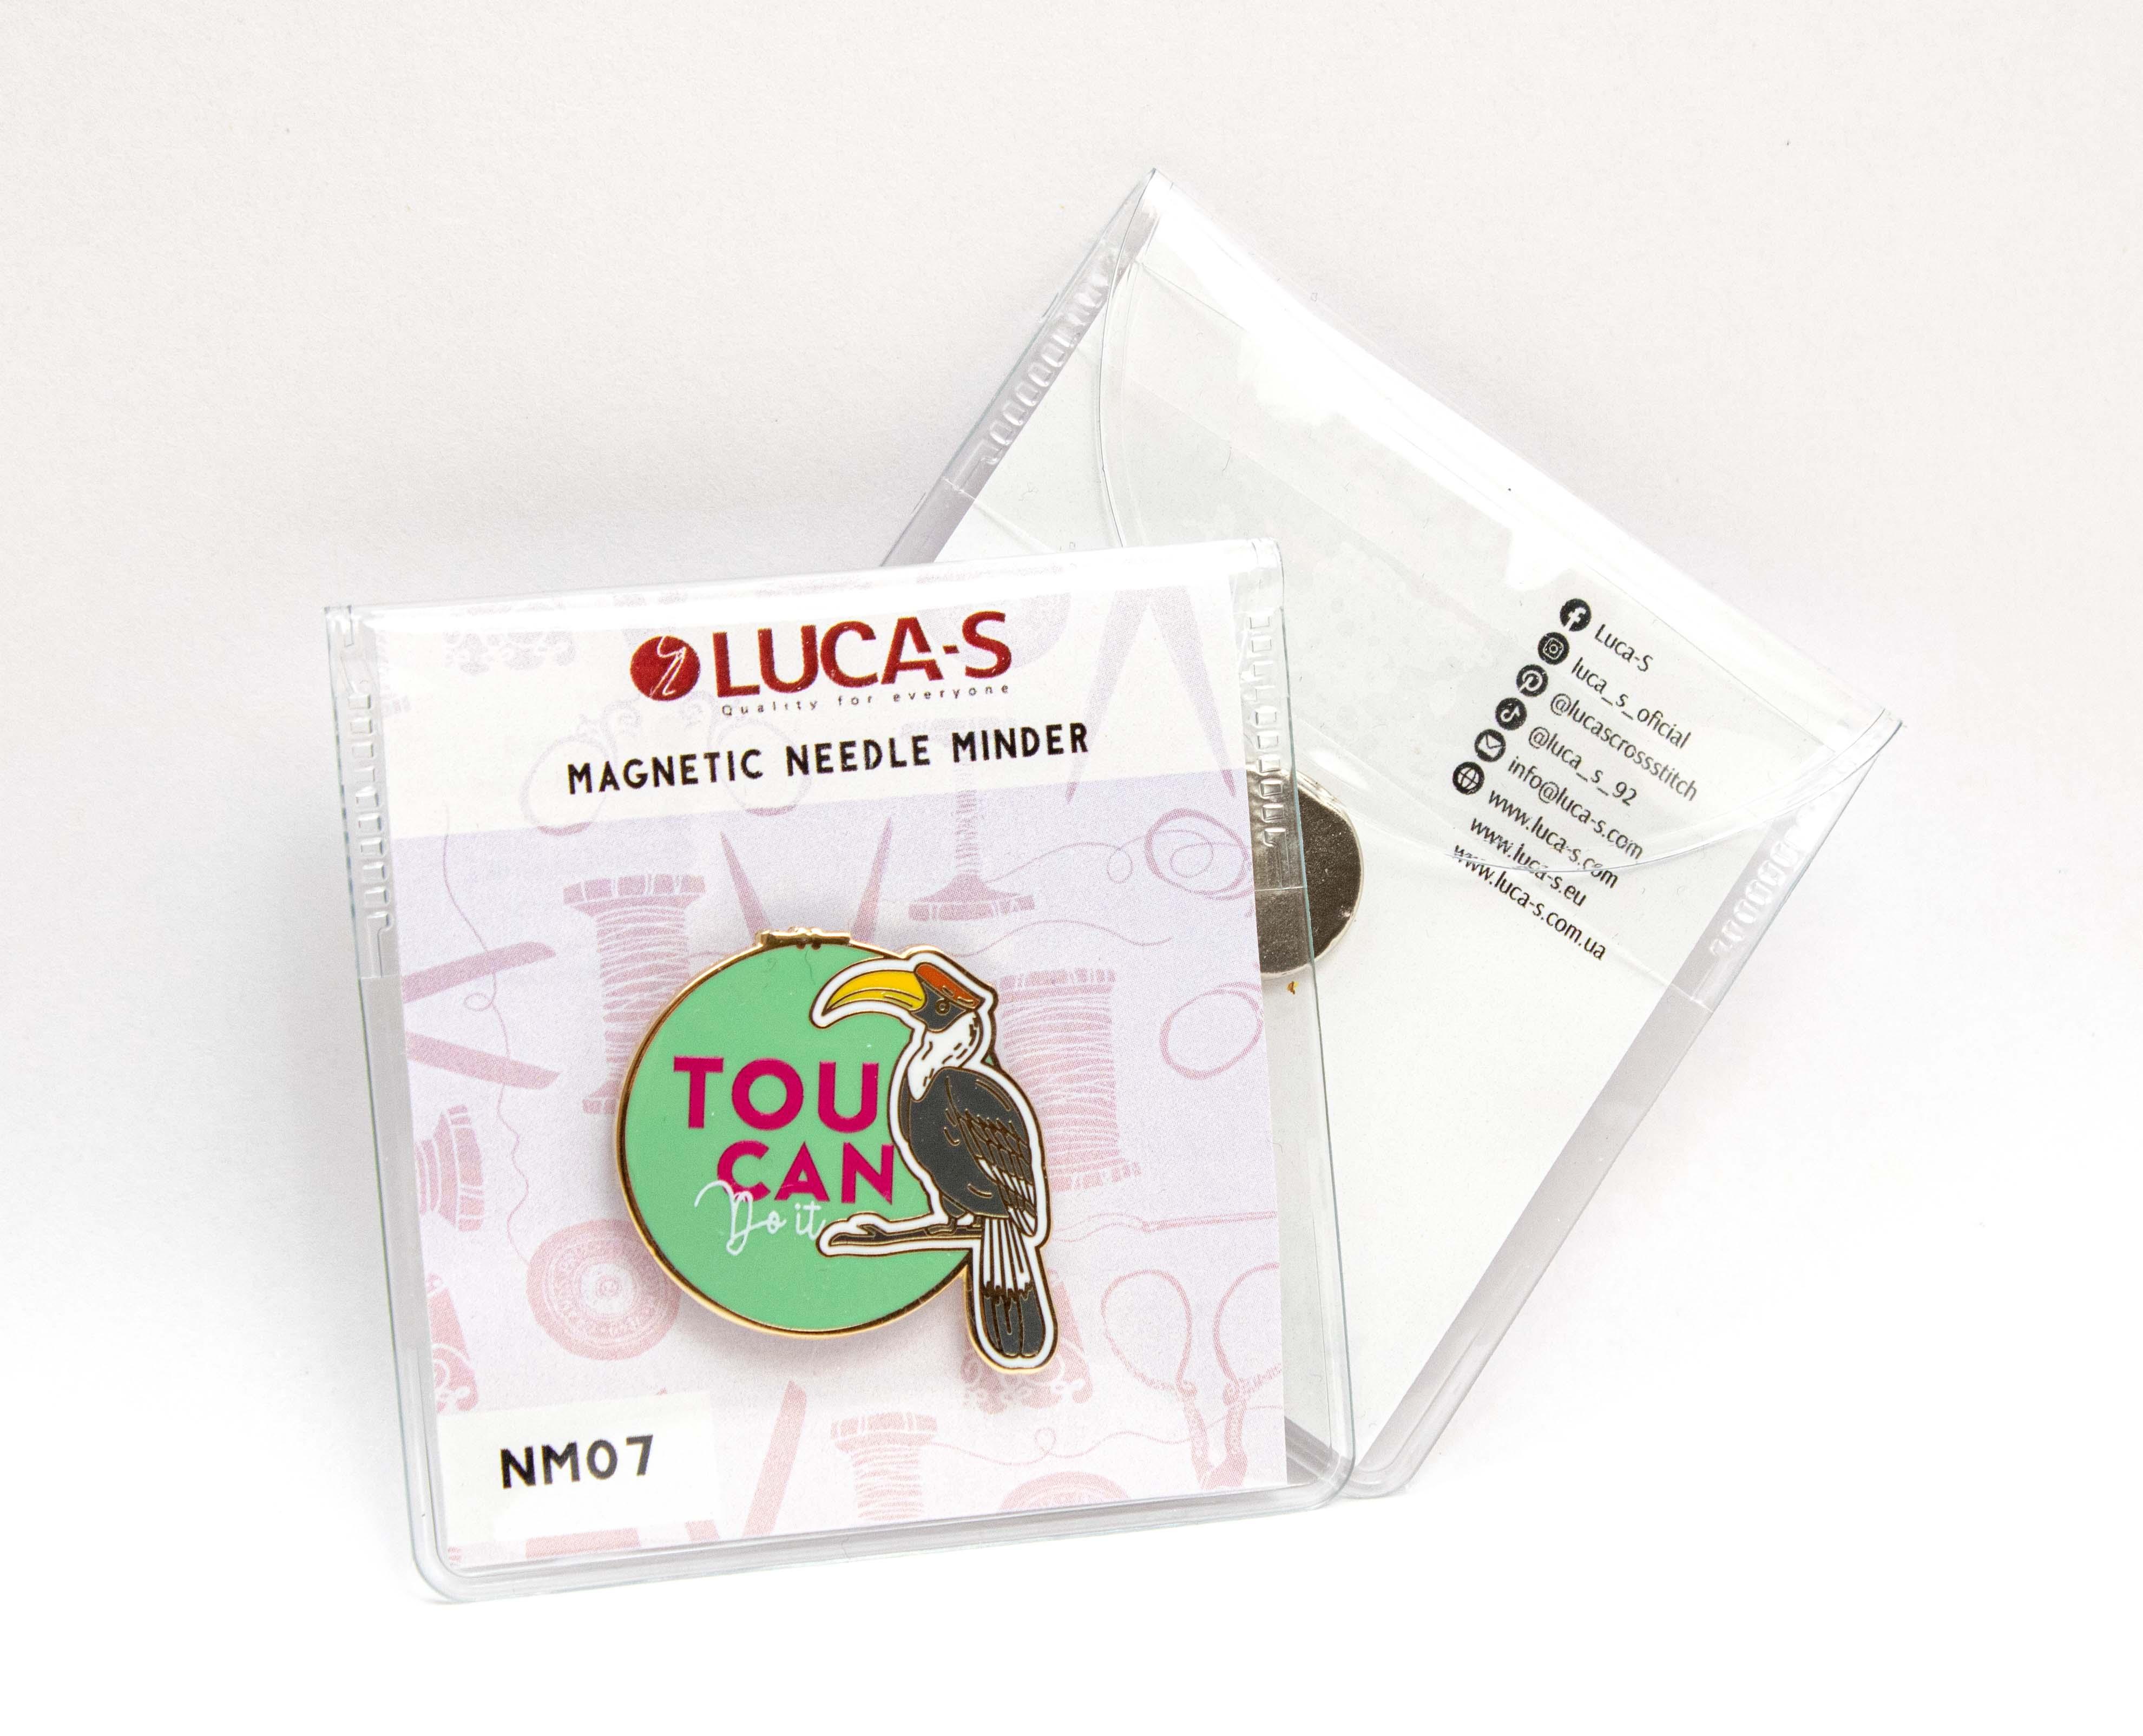 Magnetic Needle Minder Luca-S - Tou Can, NM07 - Luca-S Needle Minders